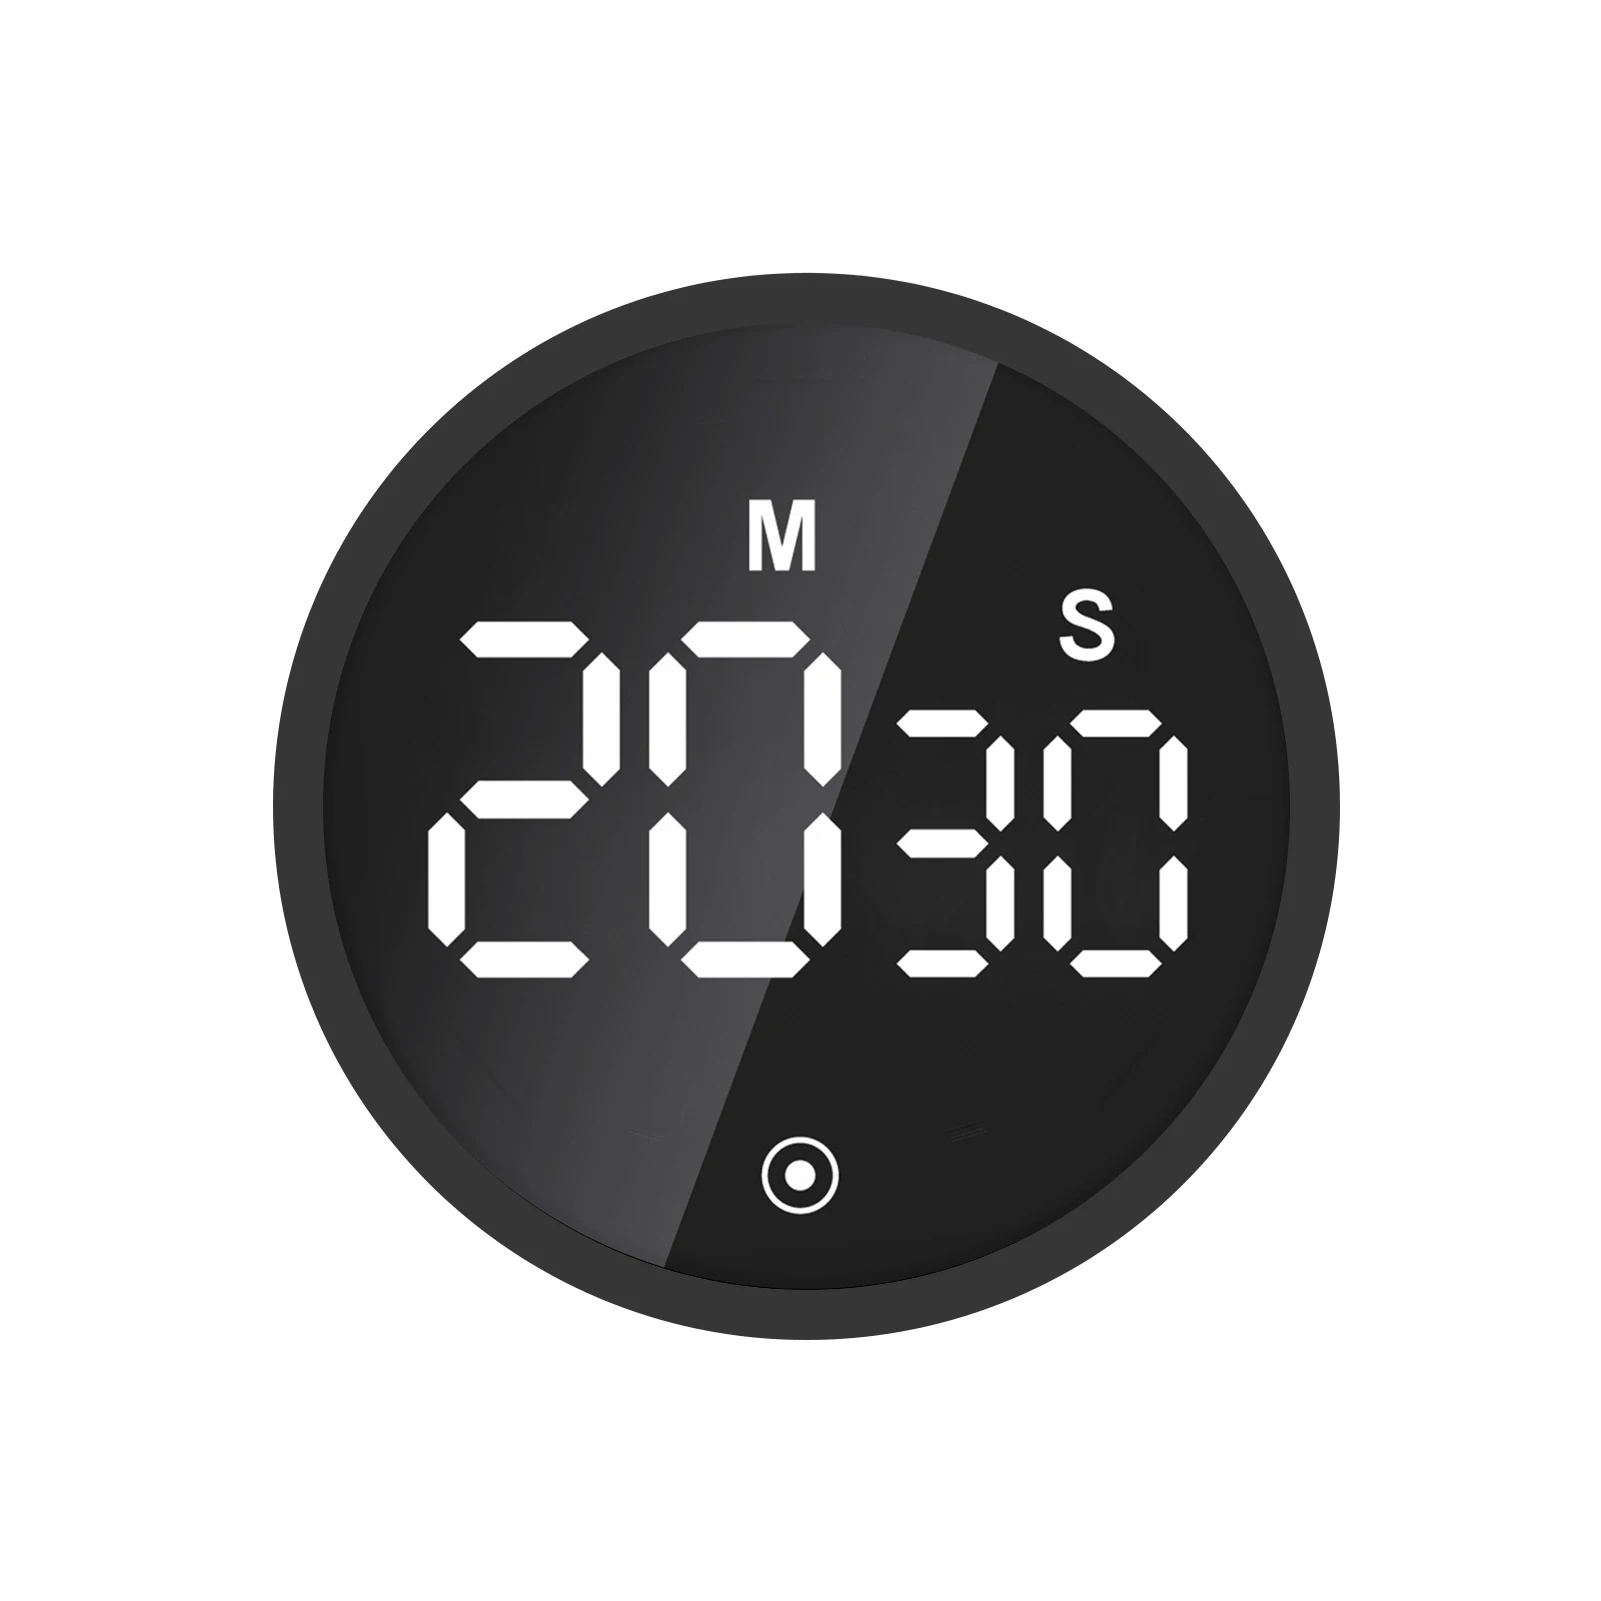 https://ae01.alicdn.com/kf/Se3717cb5093a4eb5845834334137ef8fi/Countdown-Timer-Time-meter-Magnetic-Count-Down-Count-up-Digital-Calculagraph-Volume-Brightness-Adjustable-Large-LED.jpg